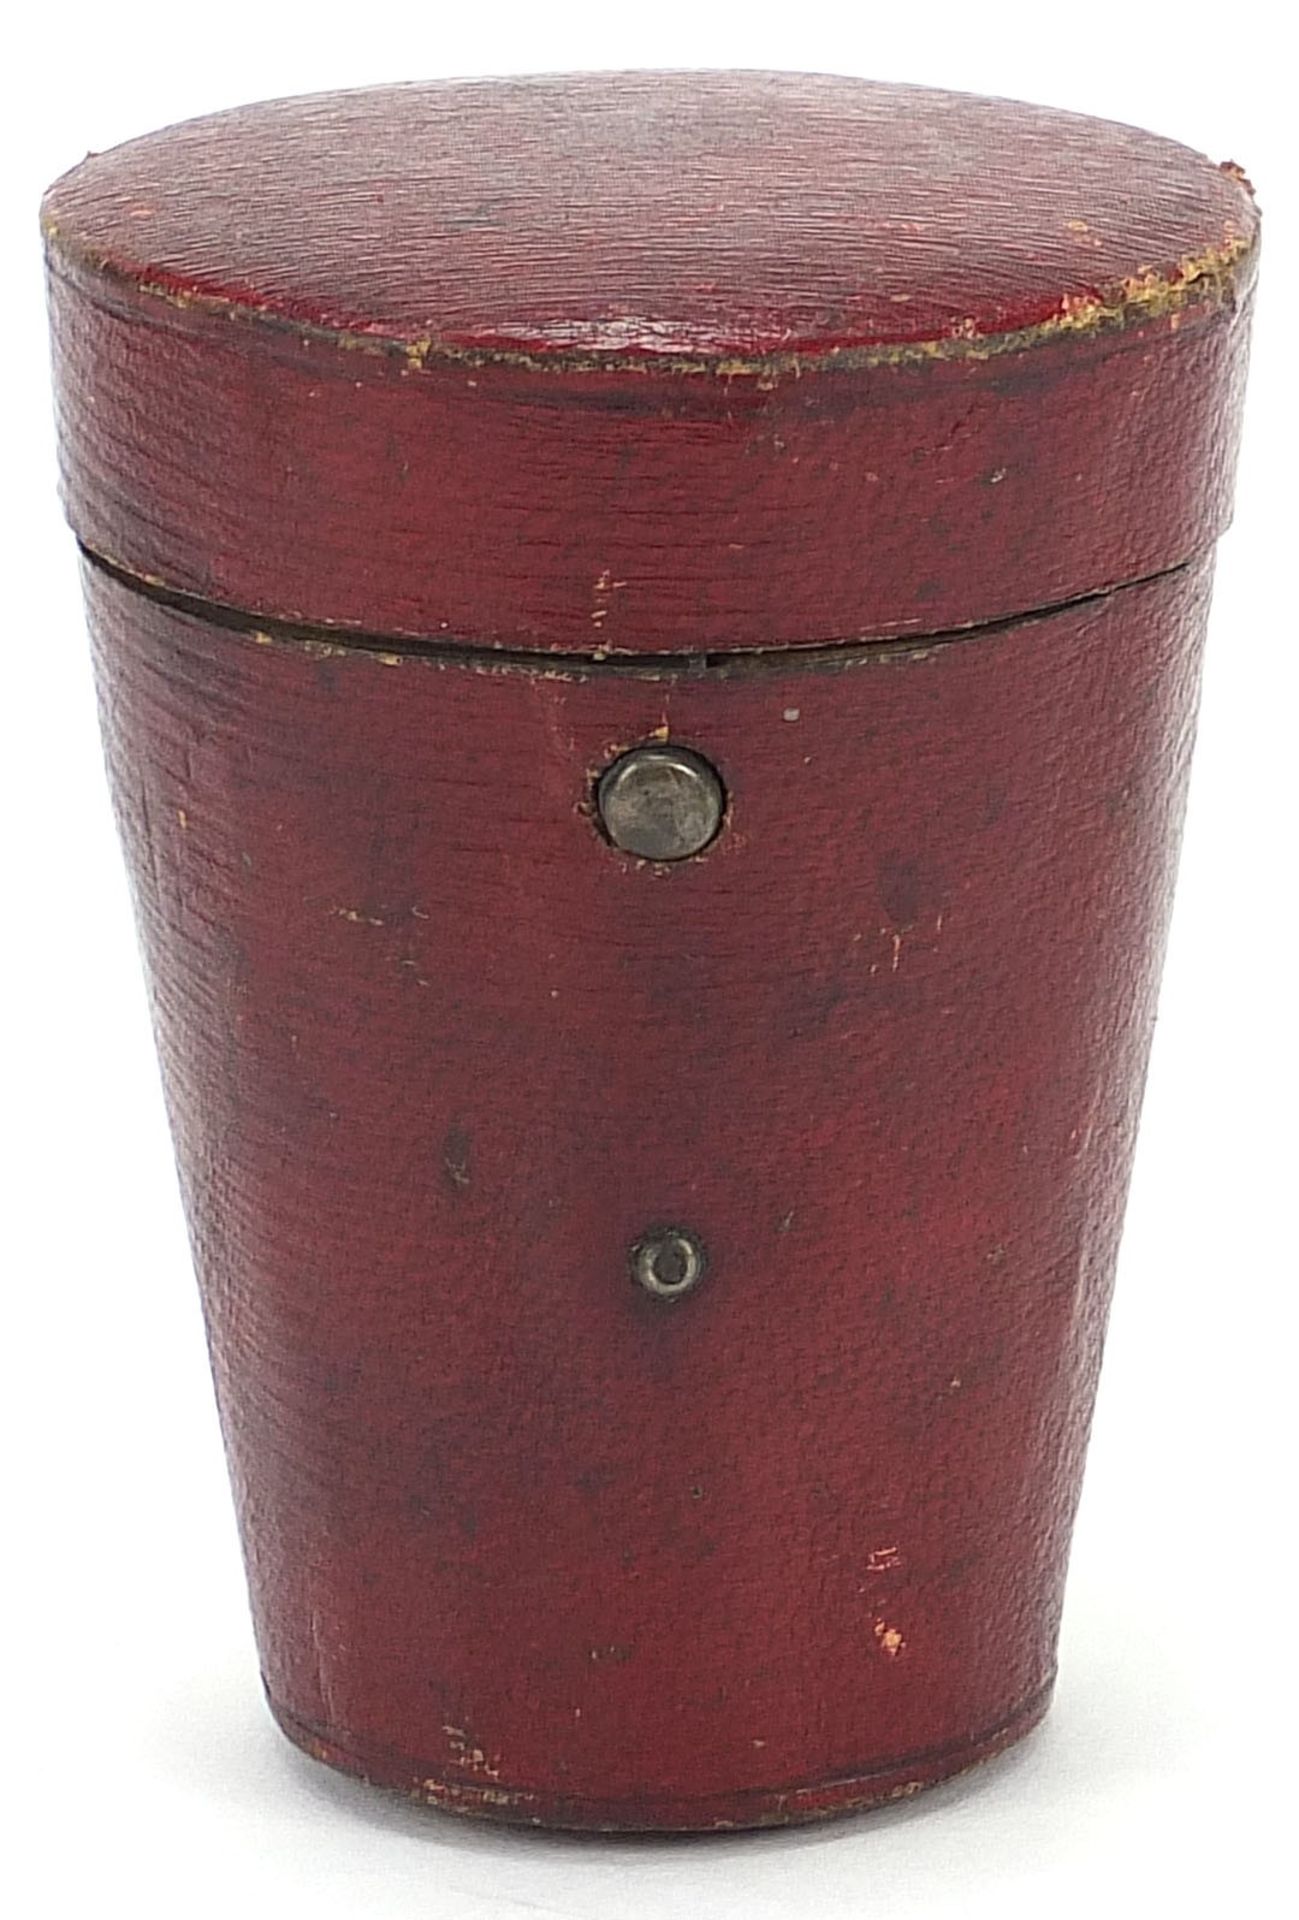 Dolland of London, early 19th century ivory and brass monocular with silk lined leather case, 6. - Image 4 of 7